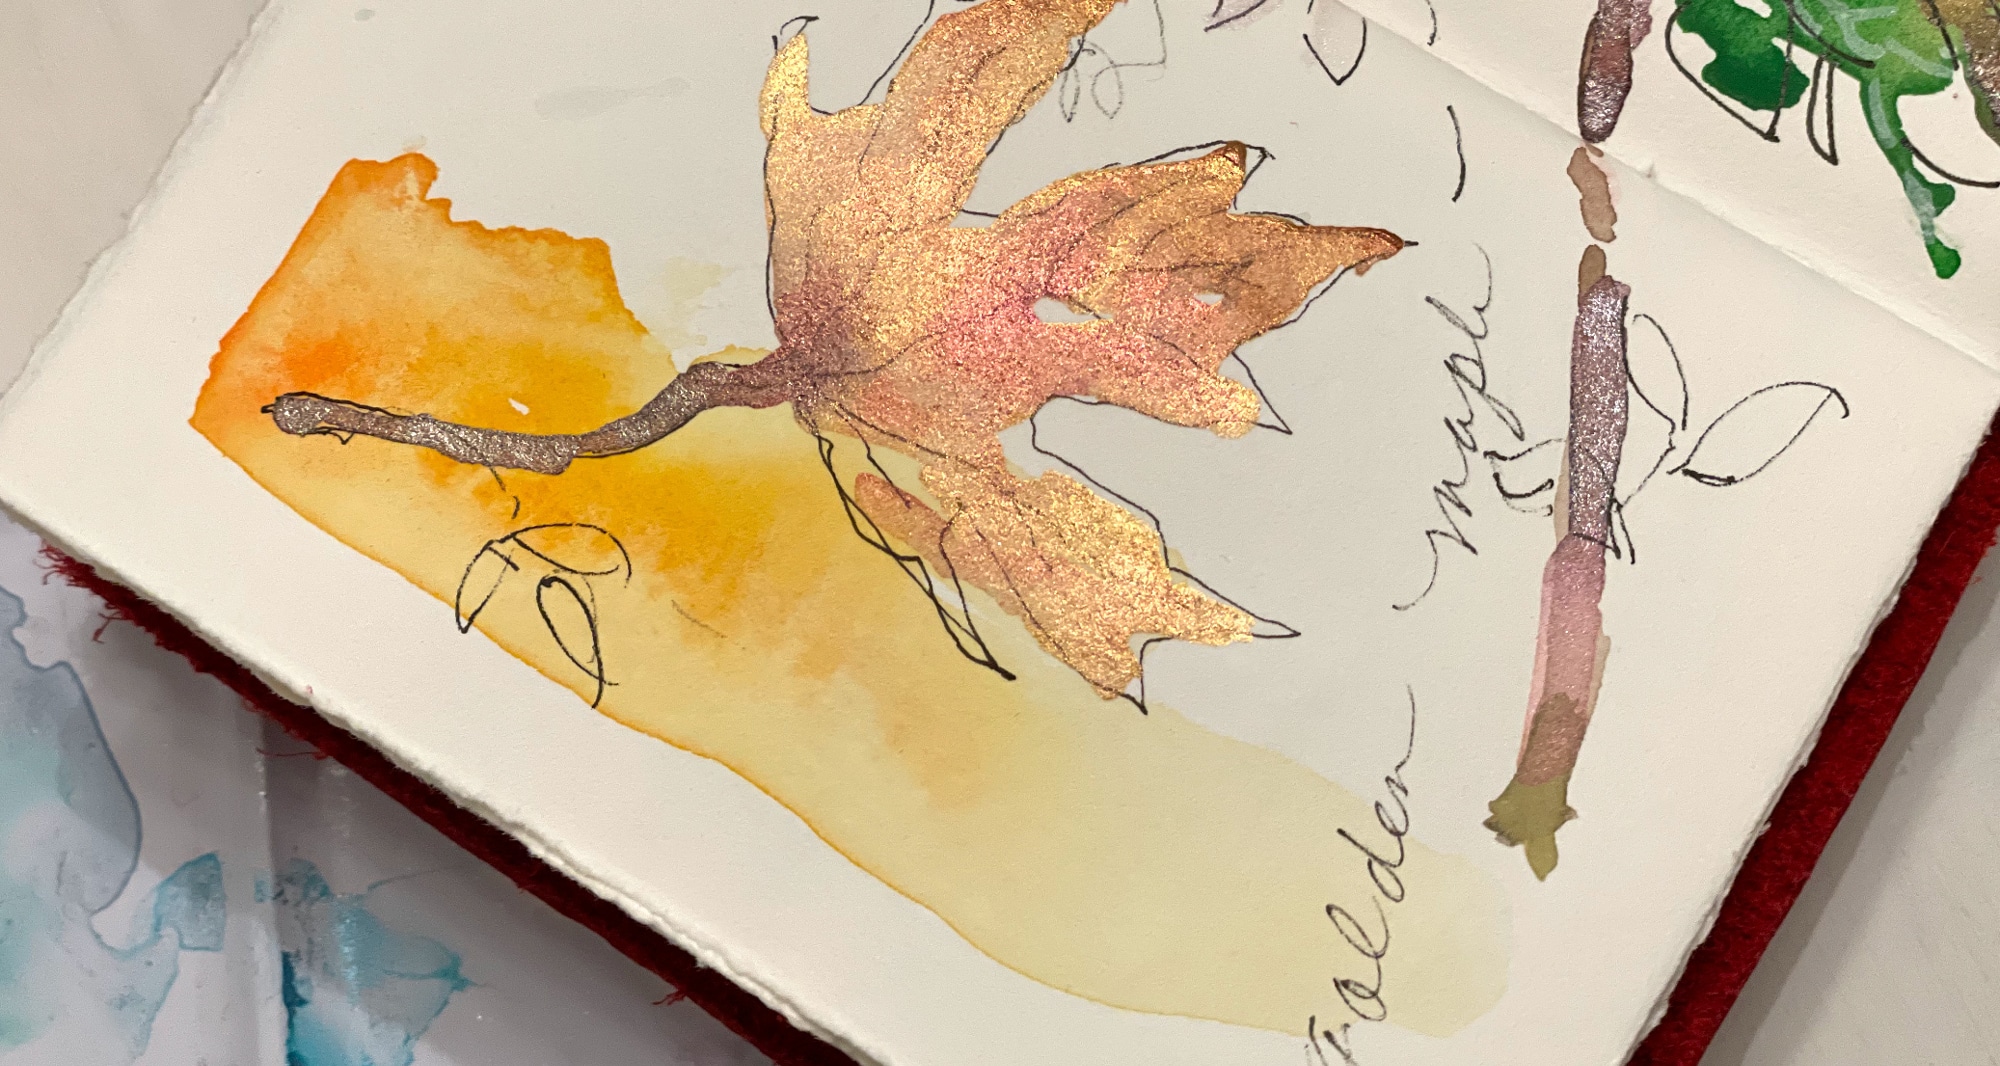 Maple in My Journal - Dreama Tolle Perry - https://dreamatolleperry.com/